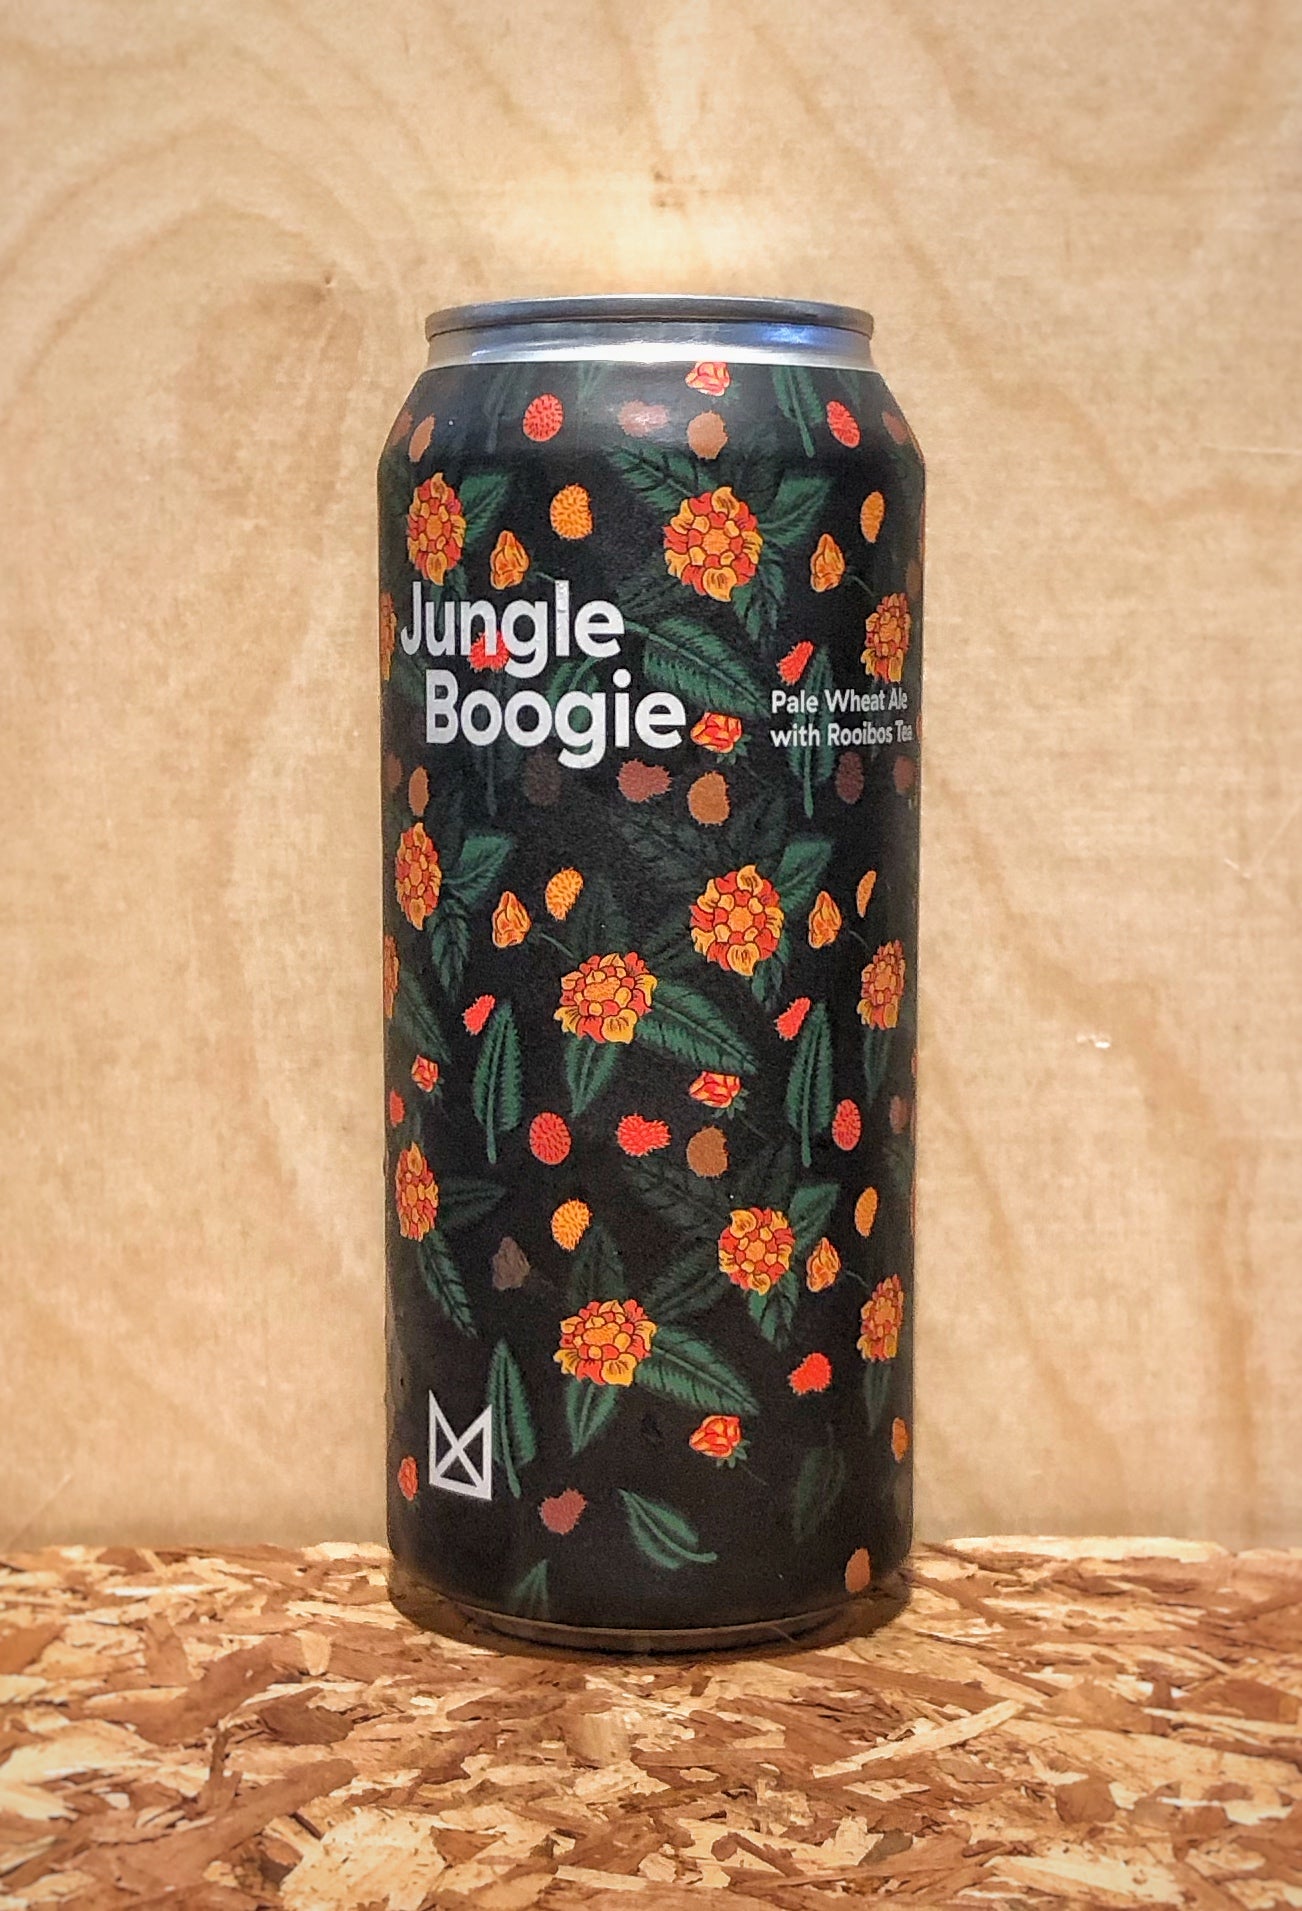 Marz Community Brewing 'Jungle Boogie' Pale Wheat Ale with Rooibos Tea (Chicago, IL)